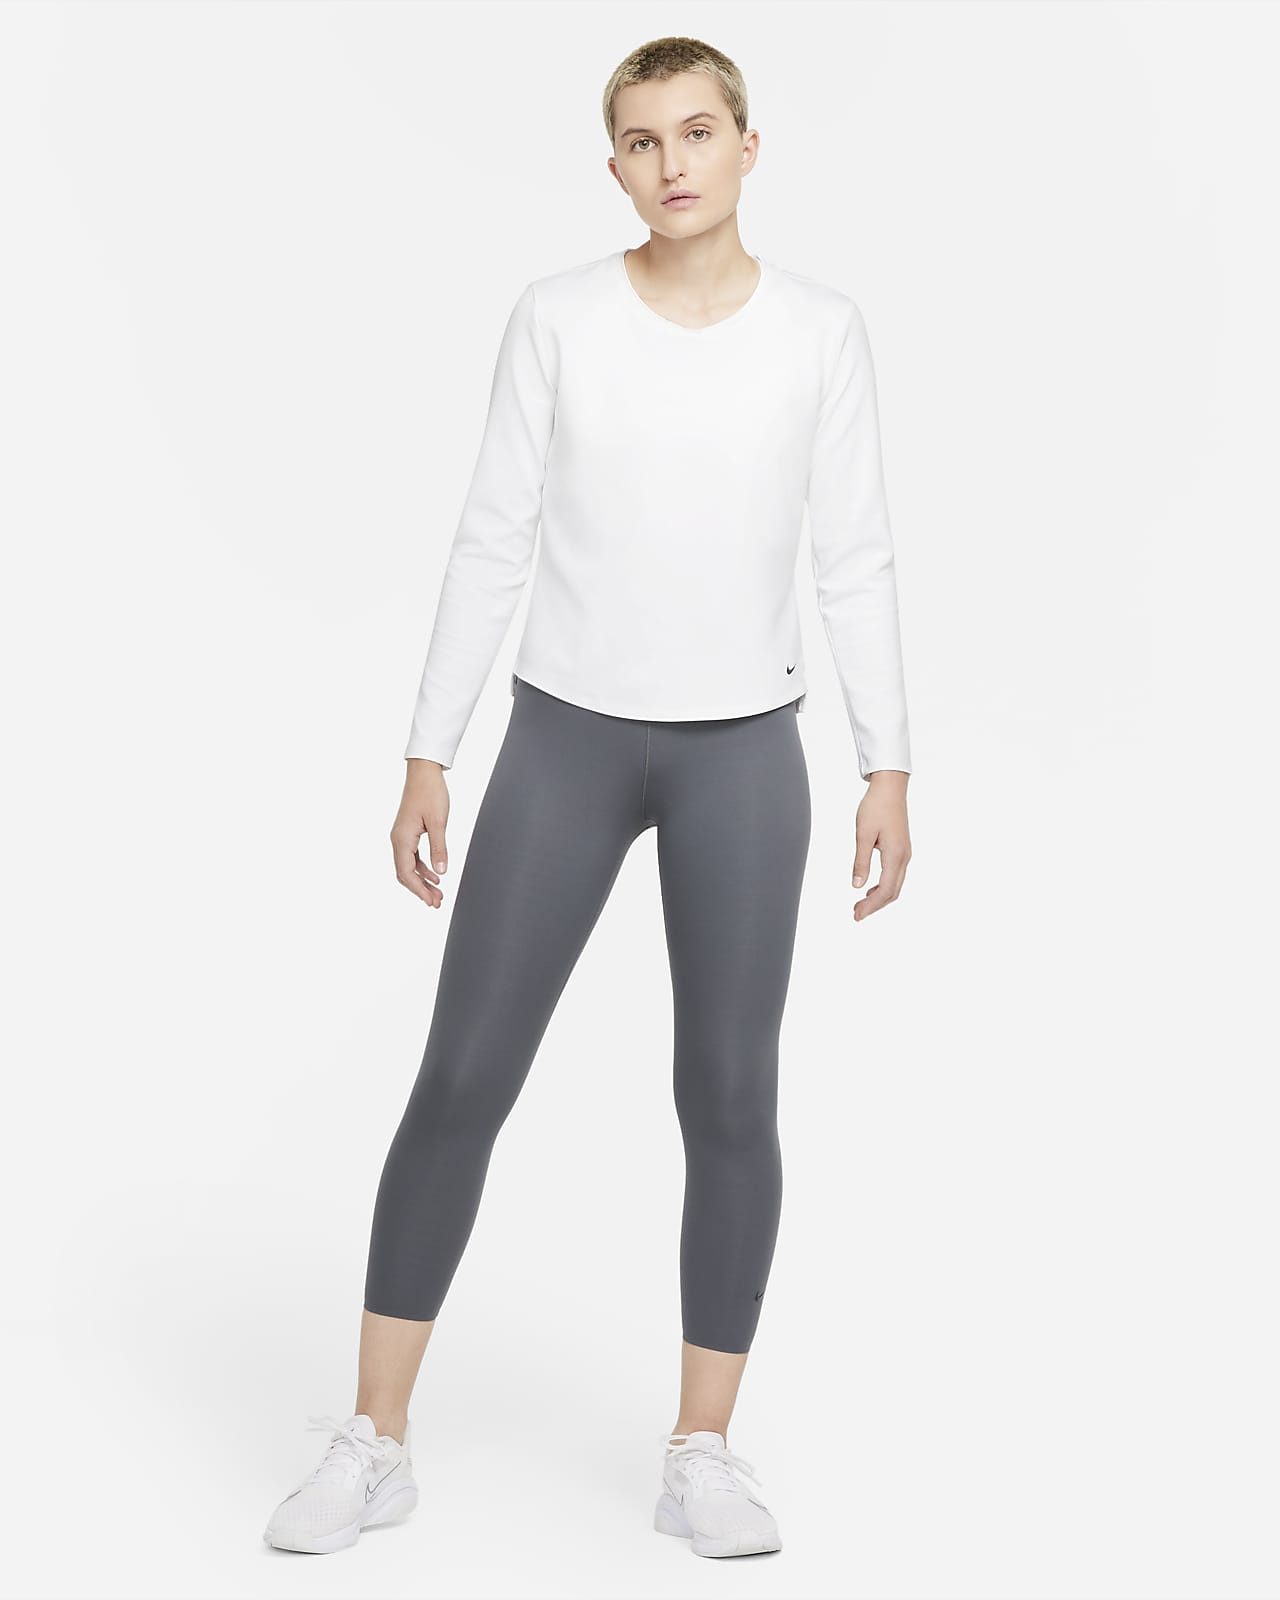 One Women\'s Nike Therma-FIT Long-Sleeve Top.